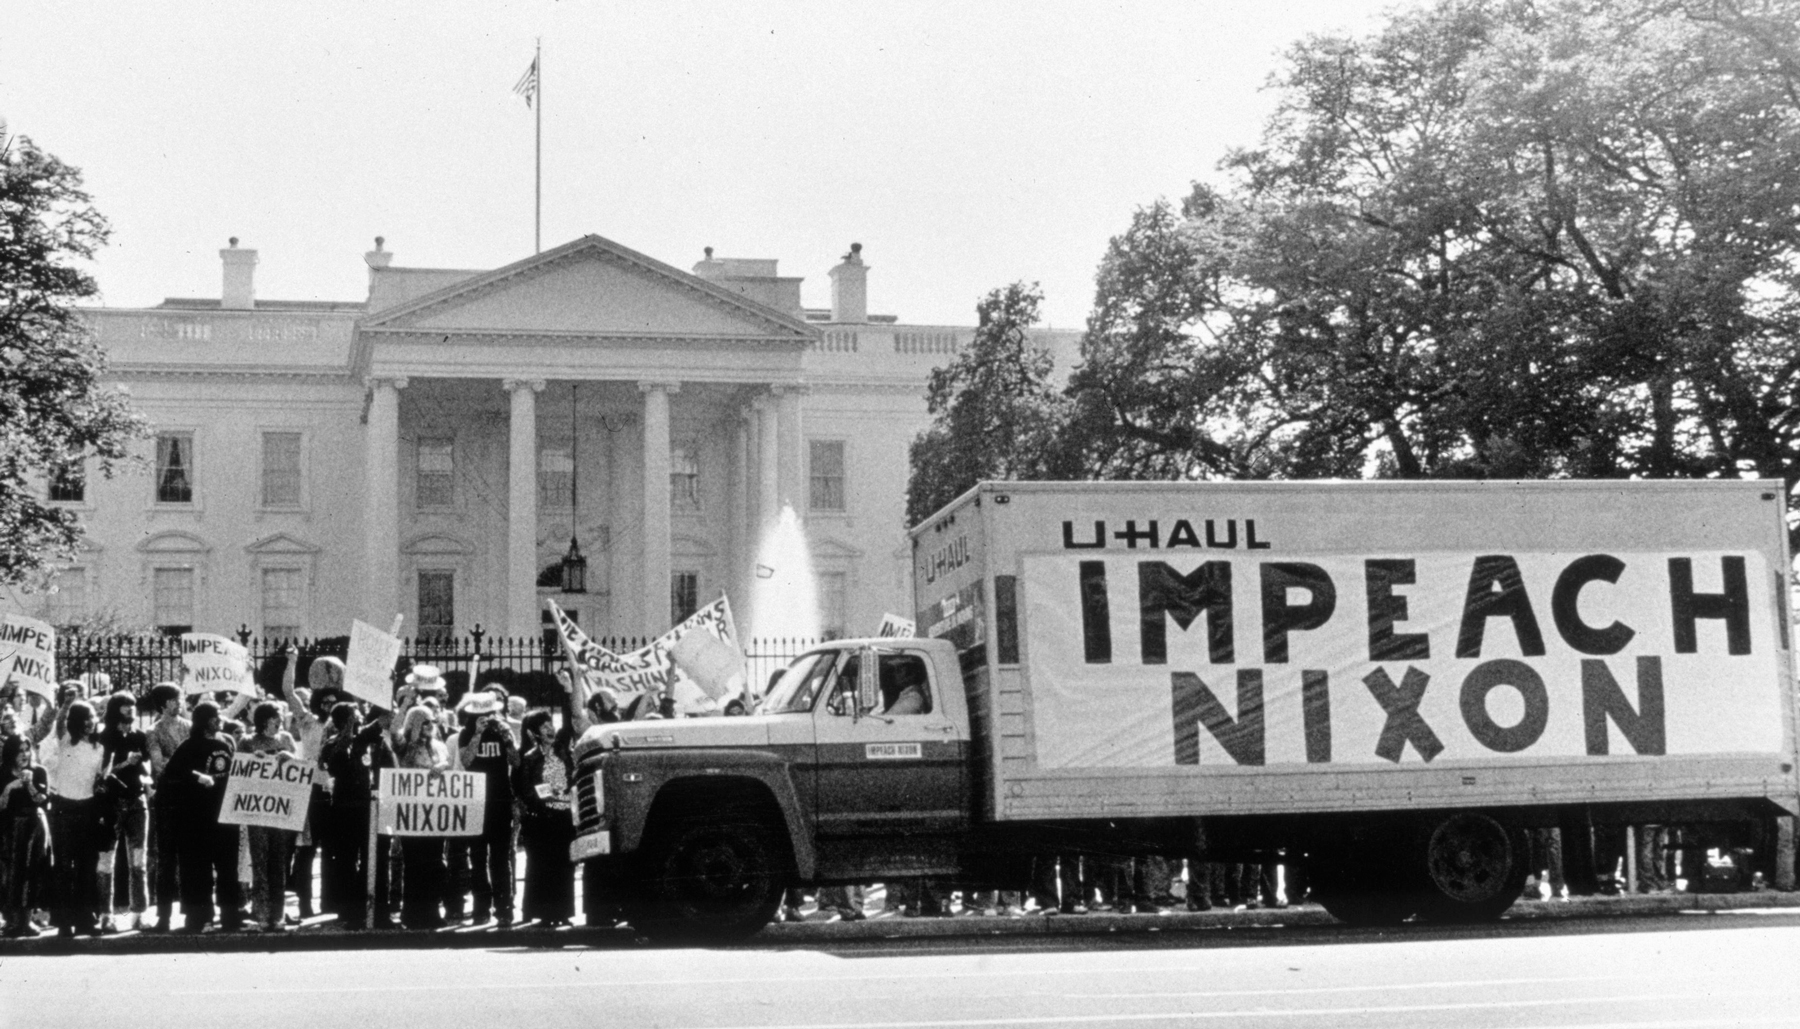 Image of an "Impeach Nixon" demonstration outside the White House